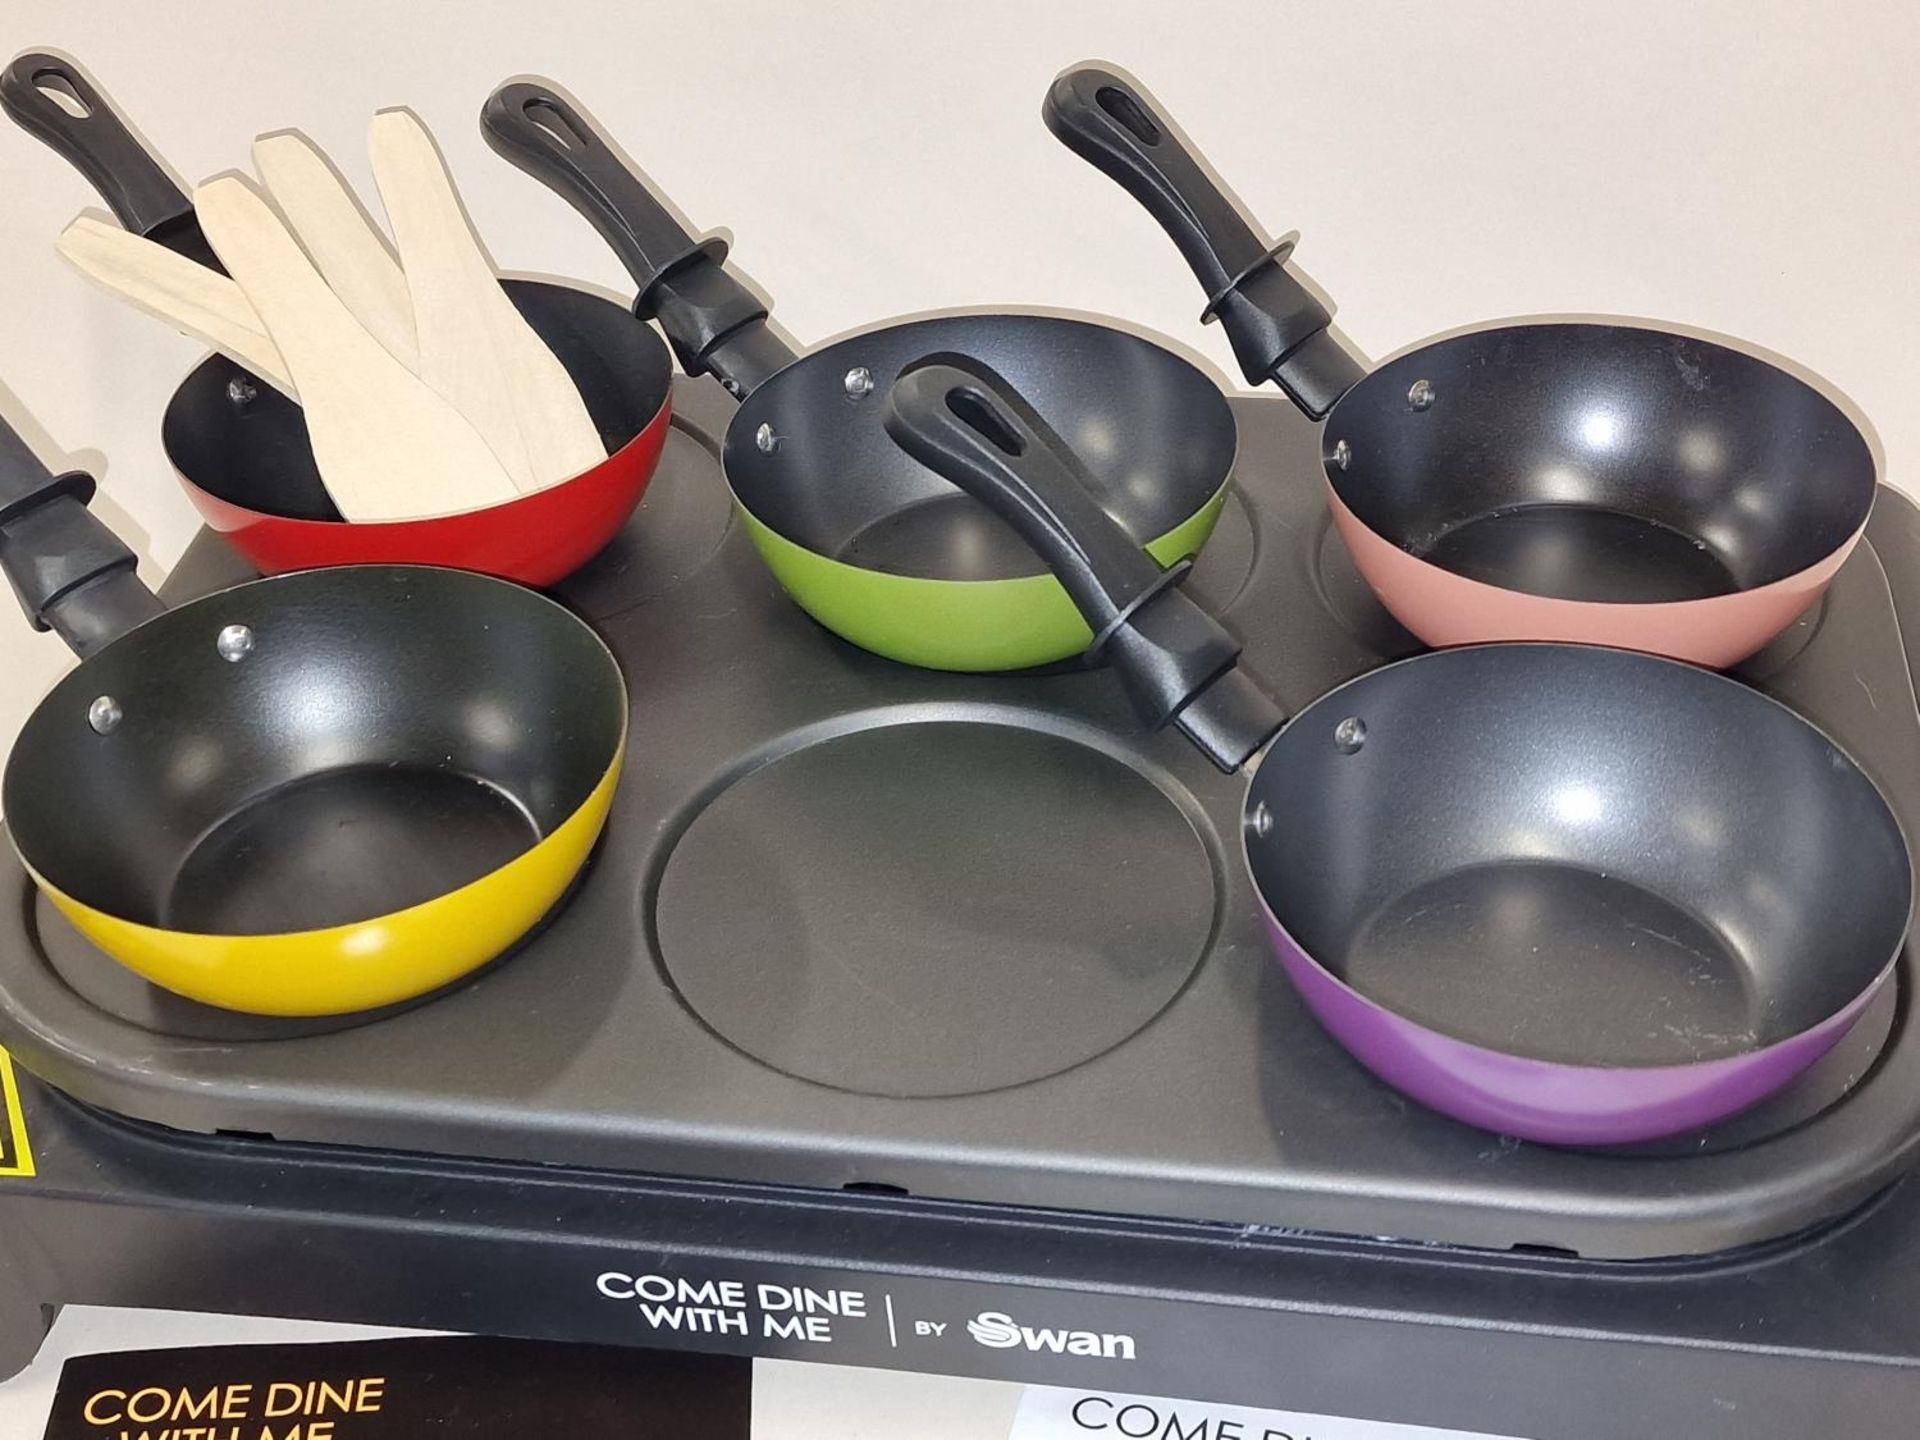 A come dine with me Party Wok with Pans and wooden utensils and manuals. - Image 2 of 2